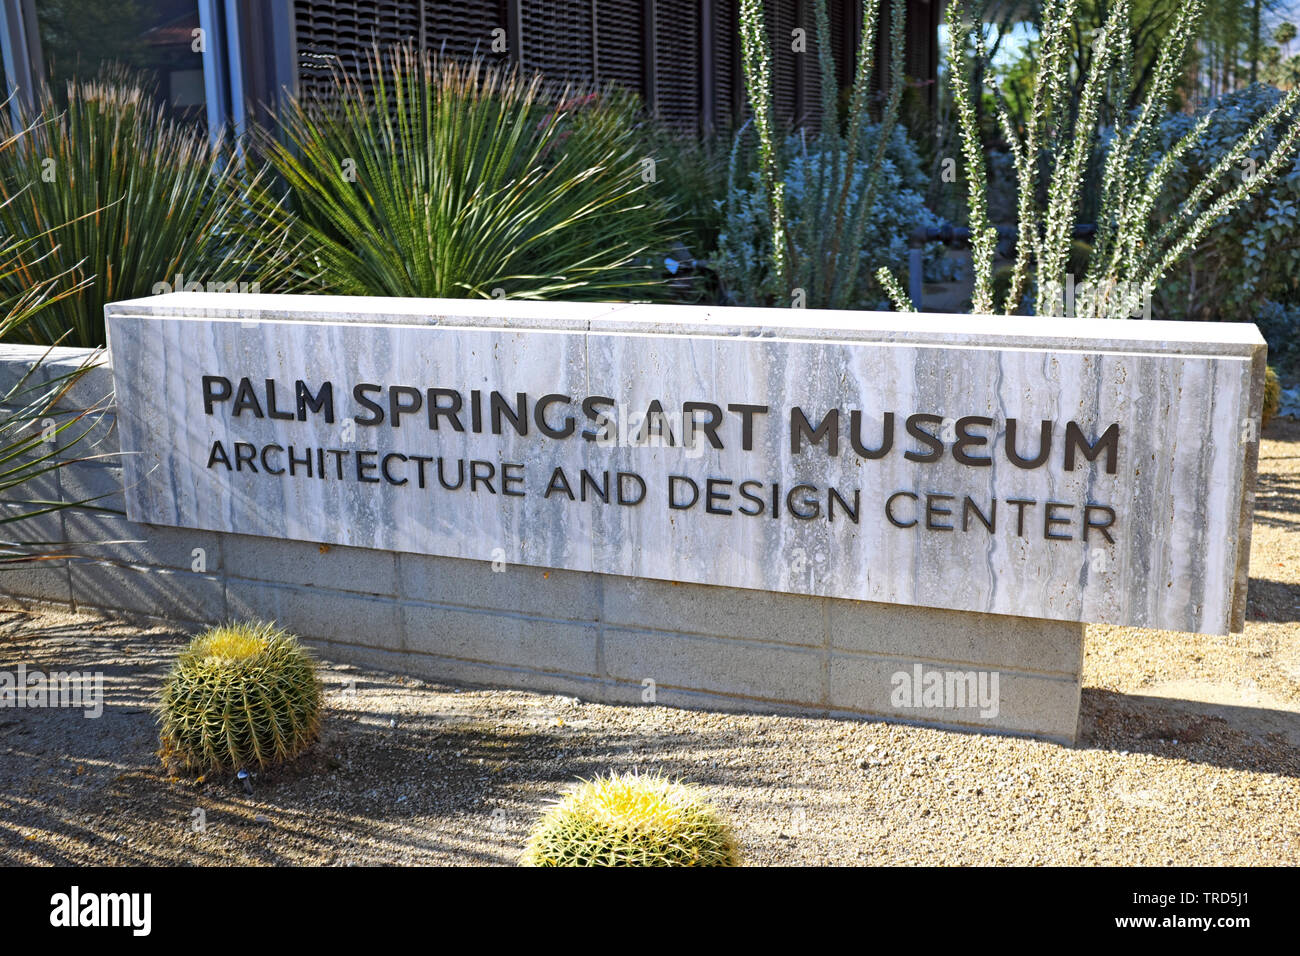 Palm Springs Art Museum Architecture and Design Center in Palm Springs, California, opened in 2014,  is the third art museum campus. Stock Photo